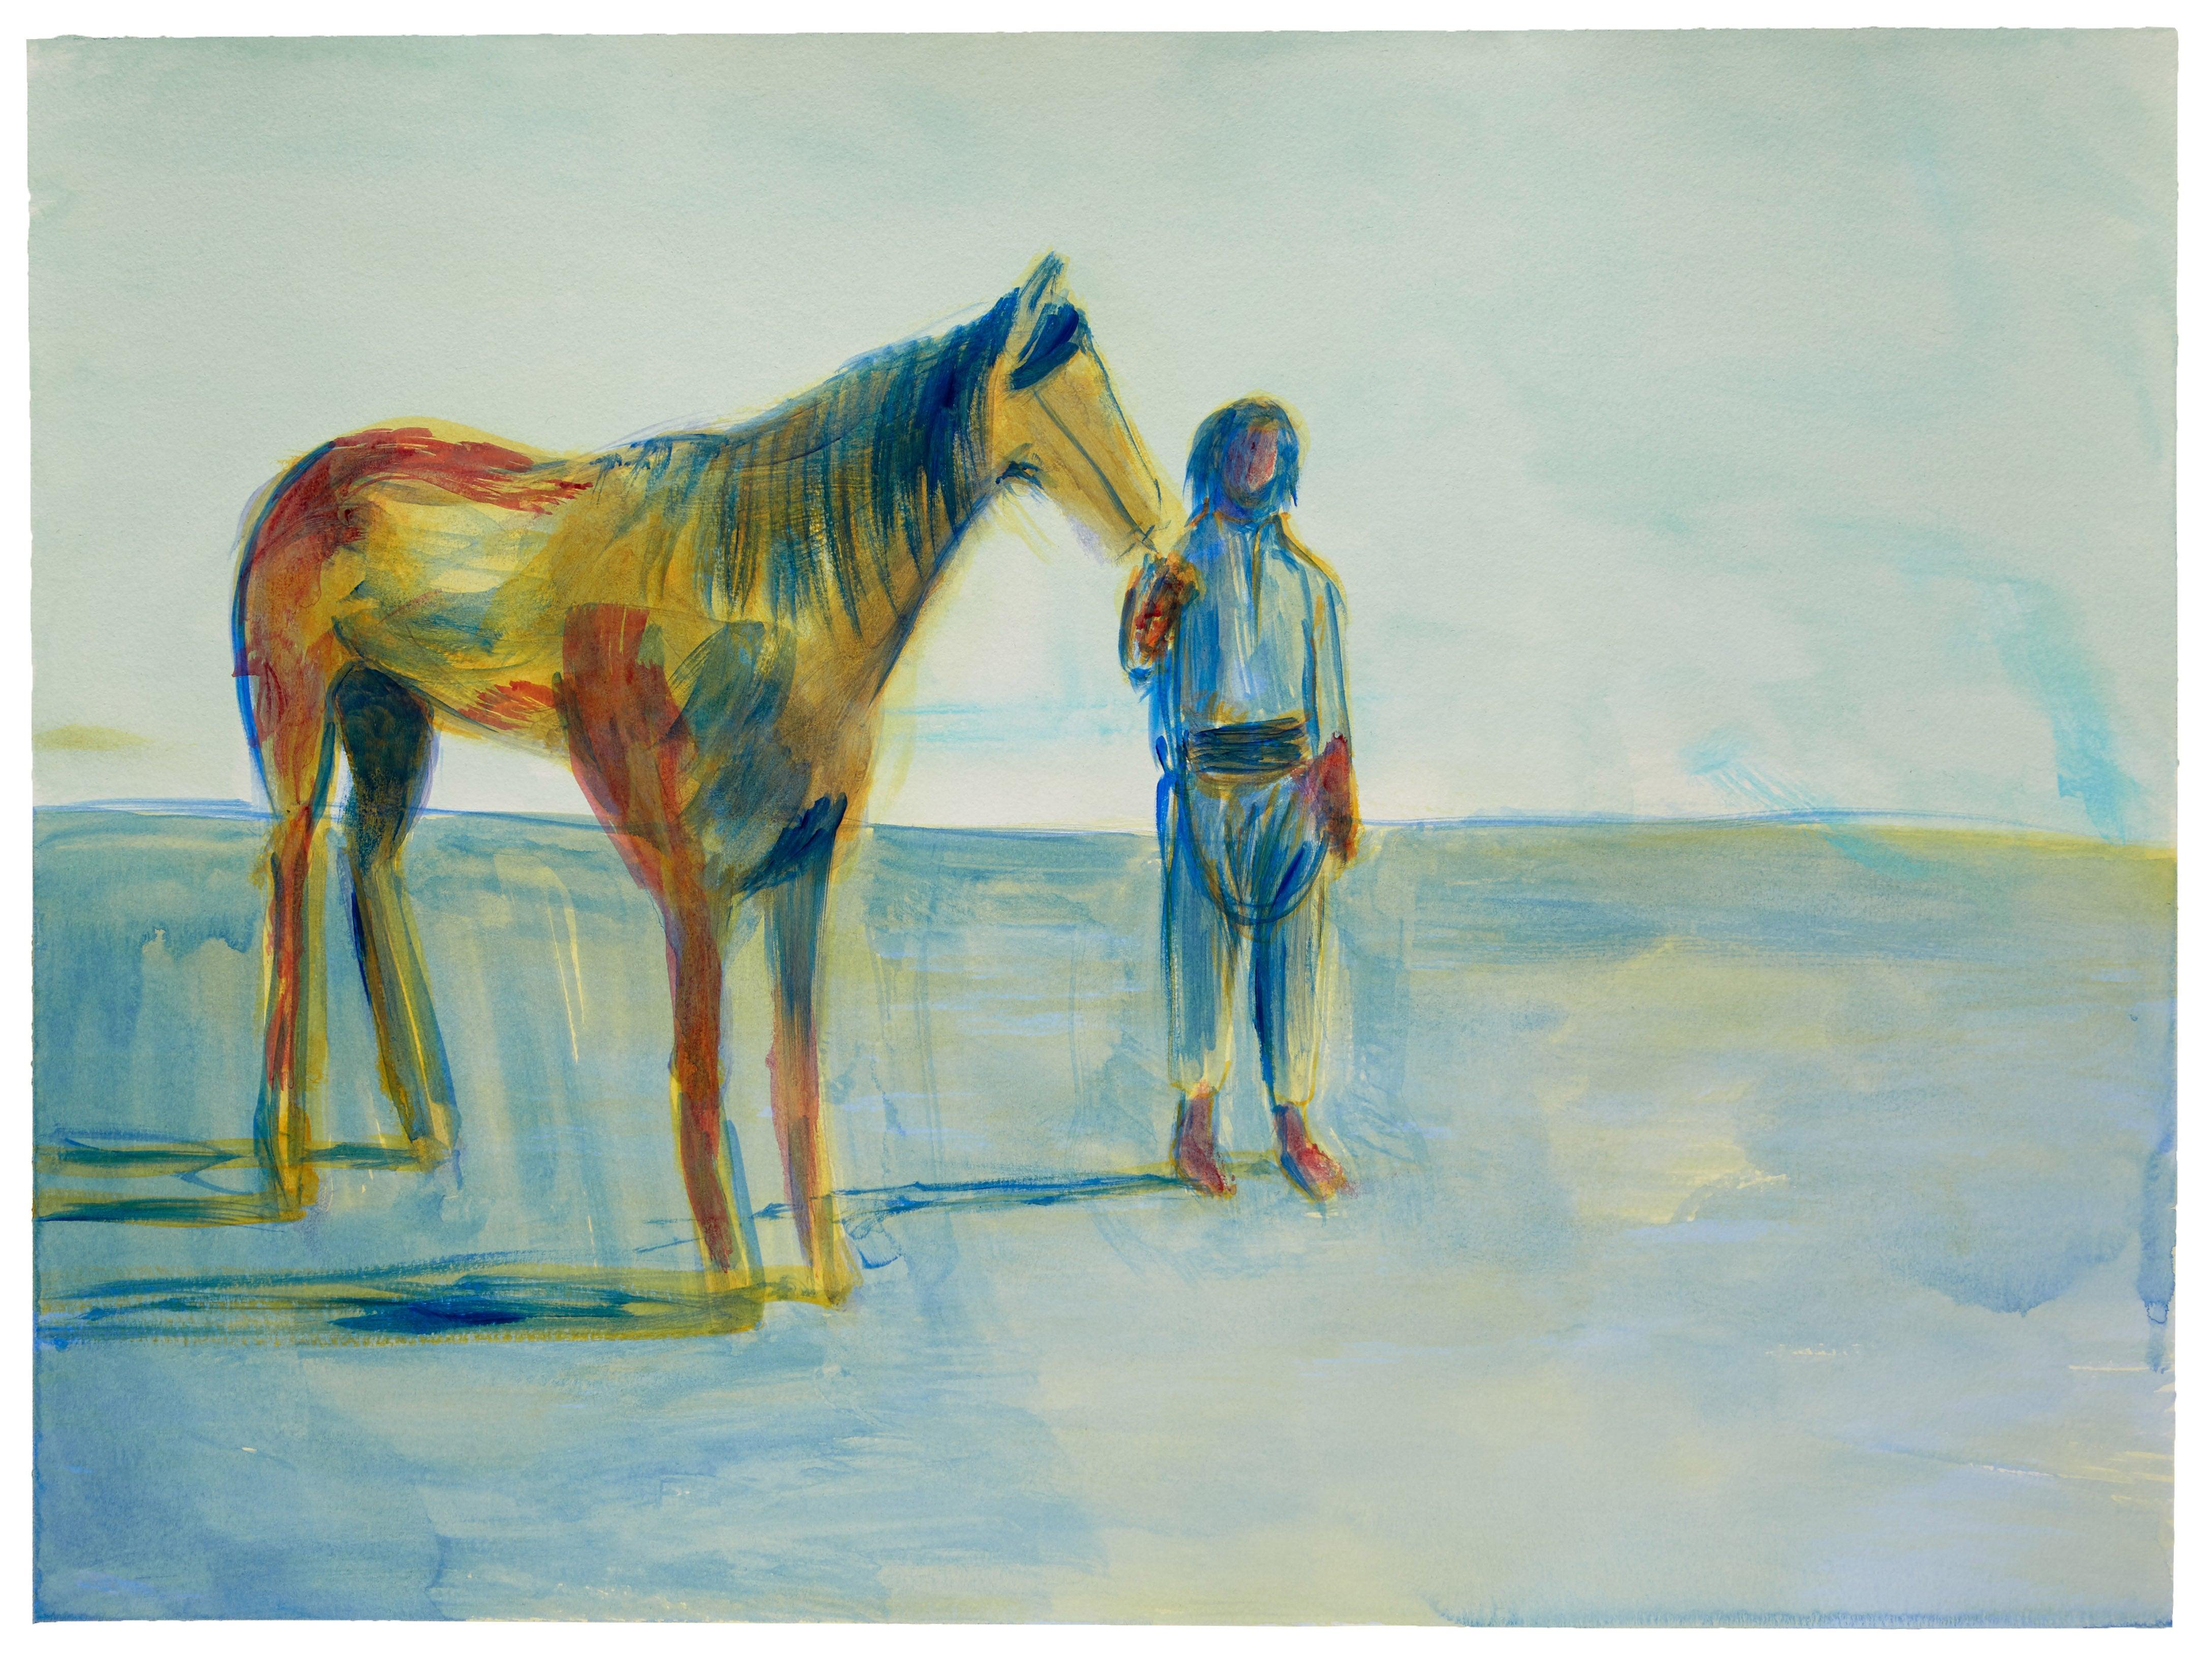 Ibrahim Abusitta Figurative Painting - If You Were a Horse 4 - bright colourful contemporary figurative horse painting